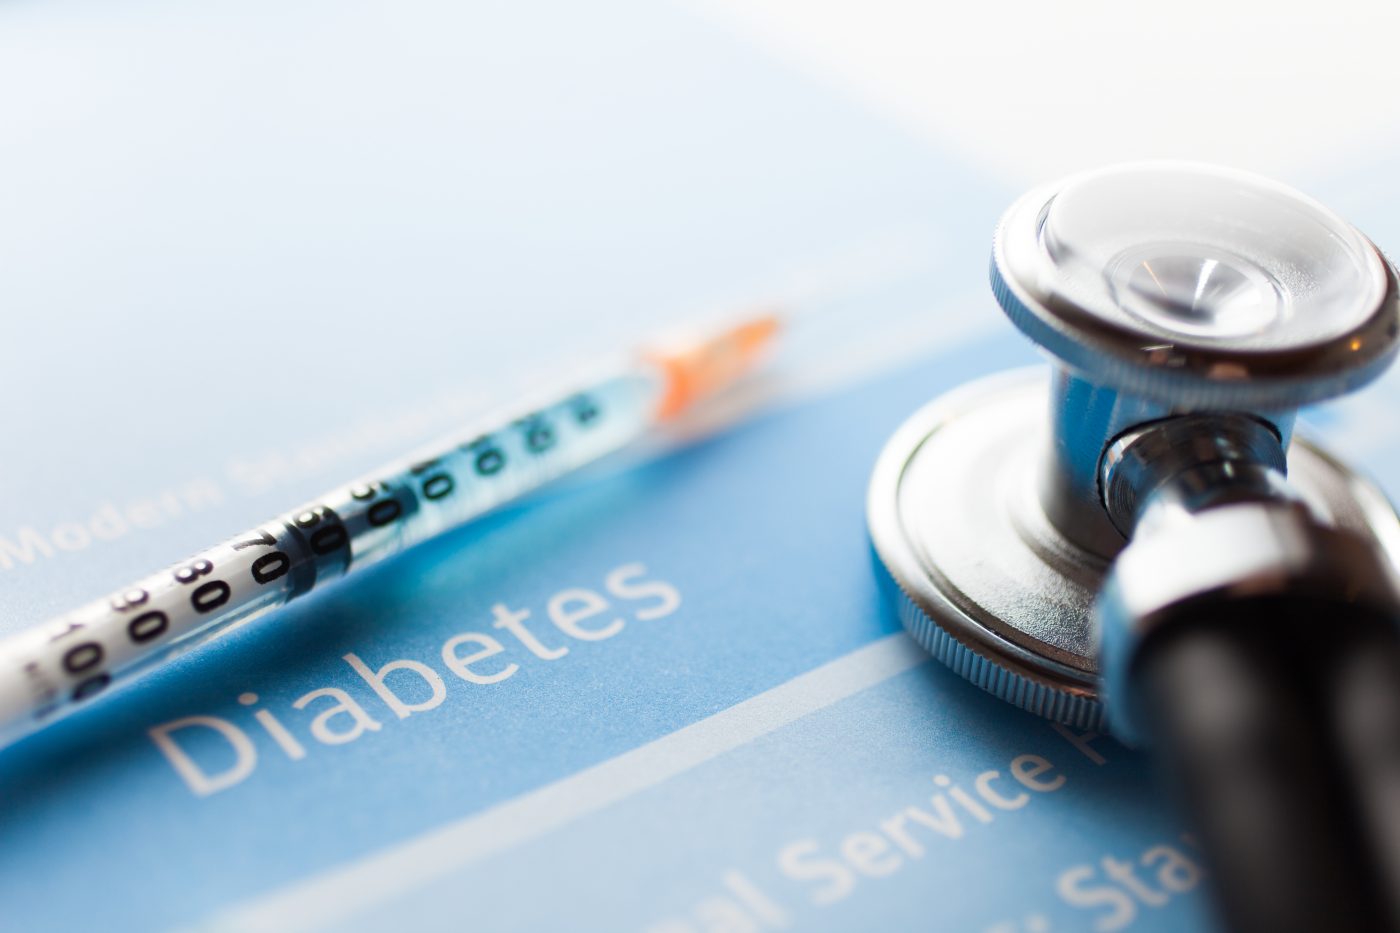 Serious Life Events During Childhood Increase the Risk for Type 1 Diabetes